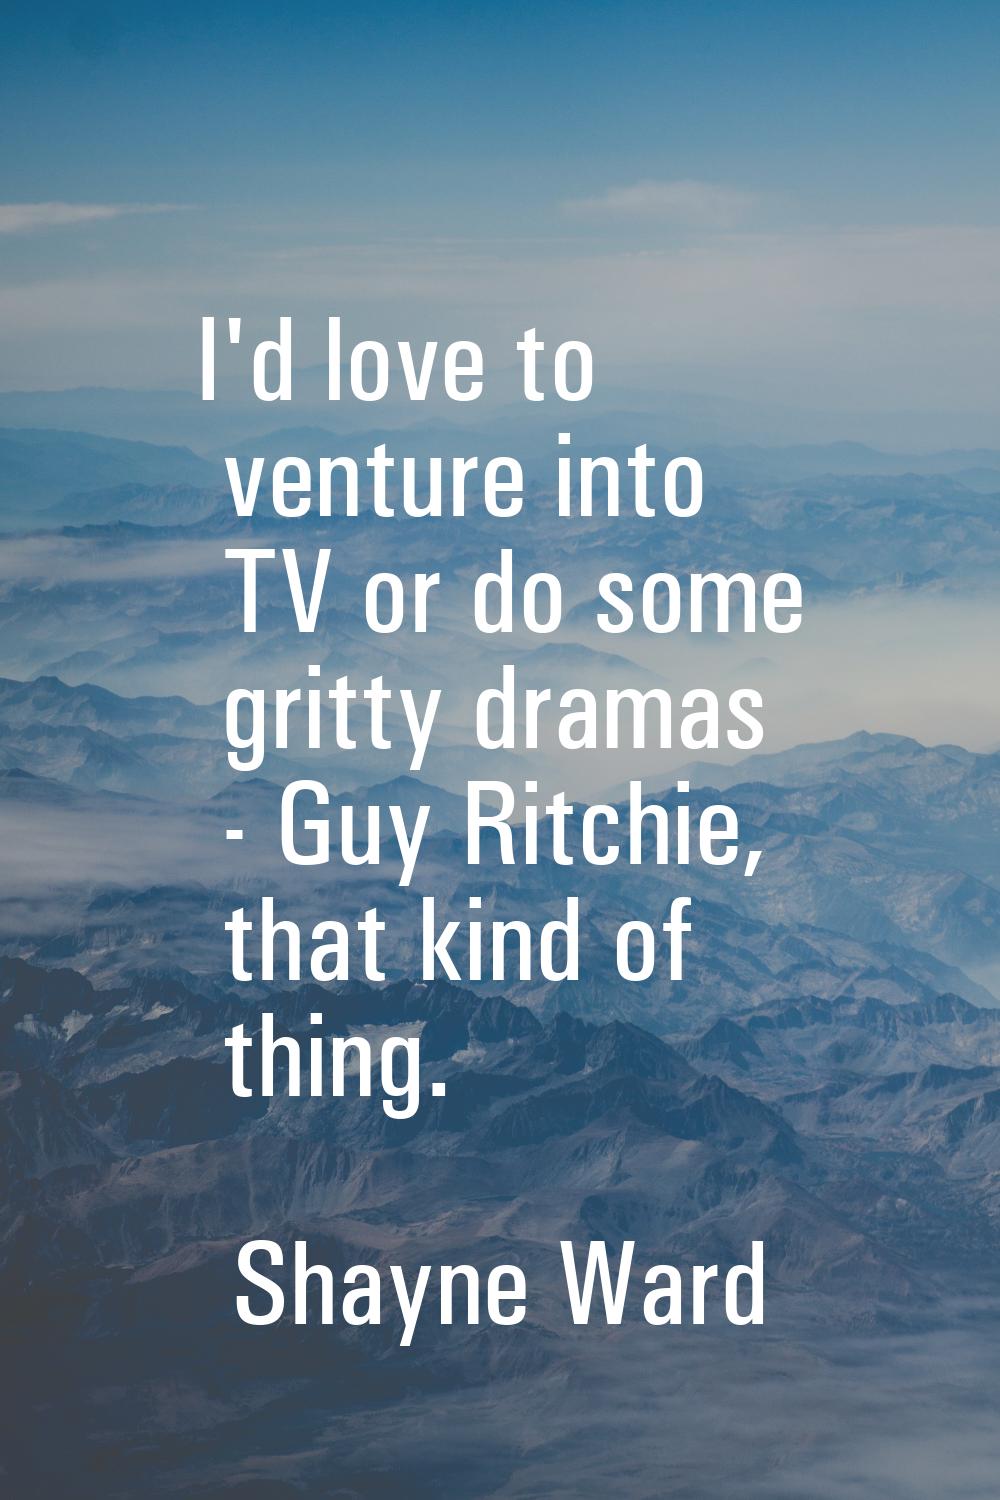 I'd love to venture into TV or do some gritty dramas - Guy Ritchie, that kind of thing.